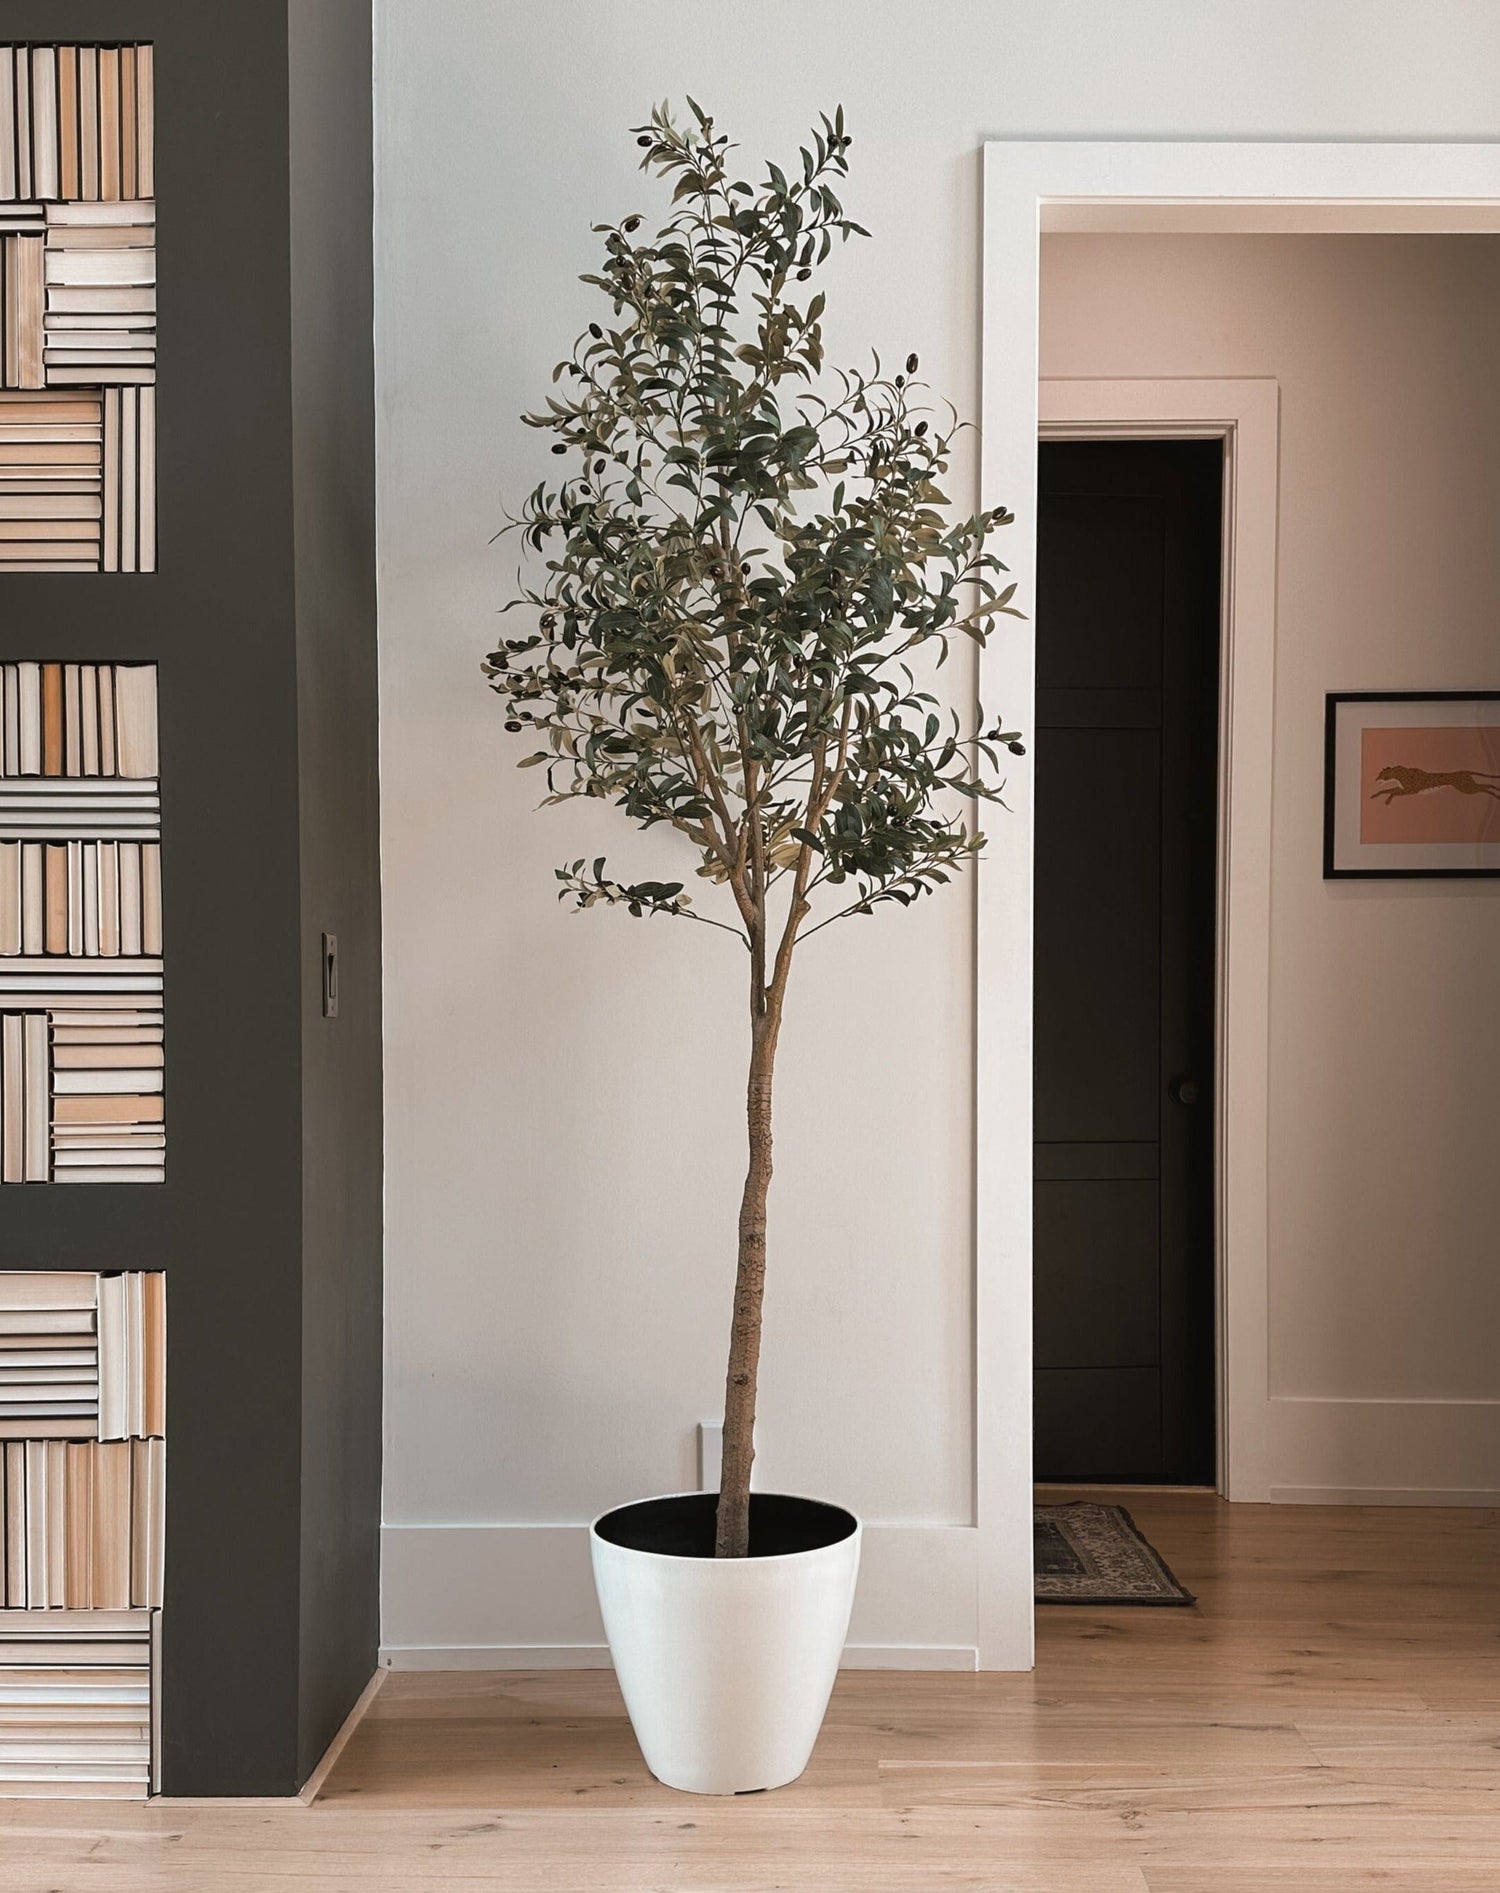 8’ Artificial Olive Tree